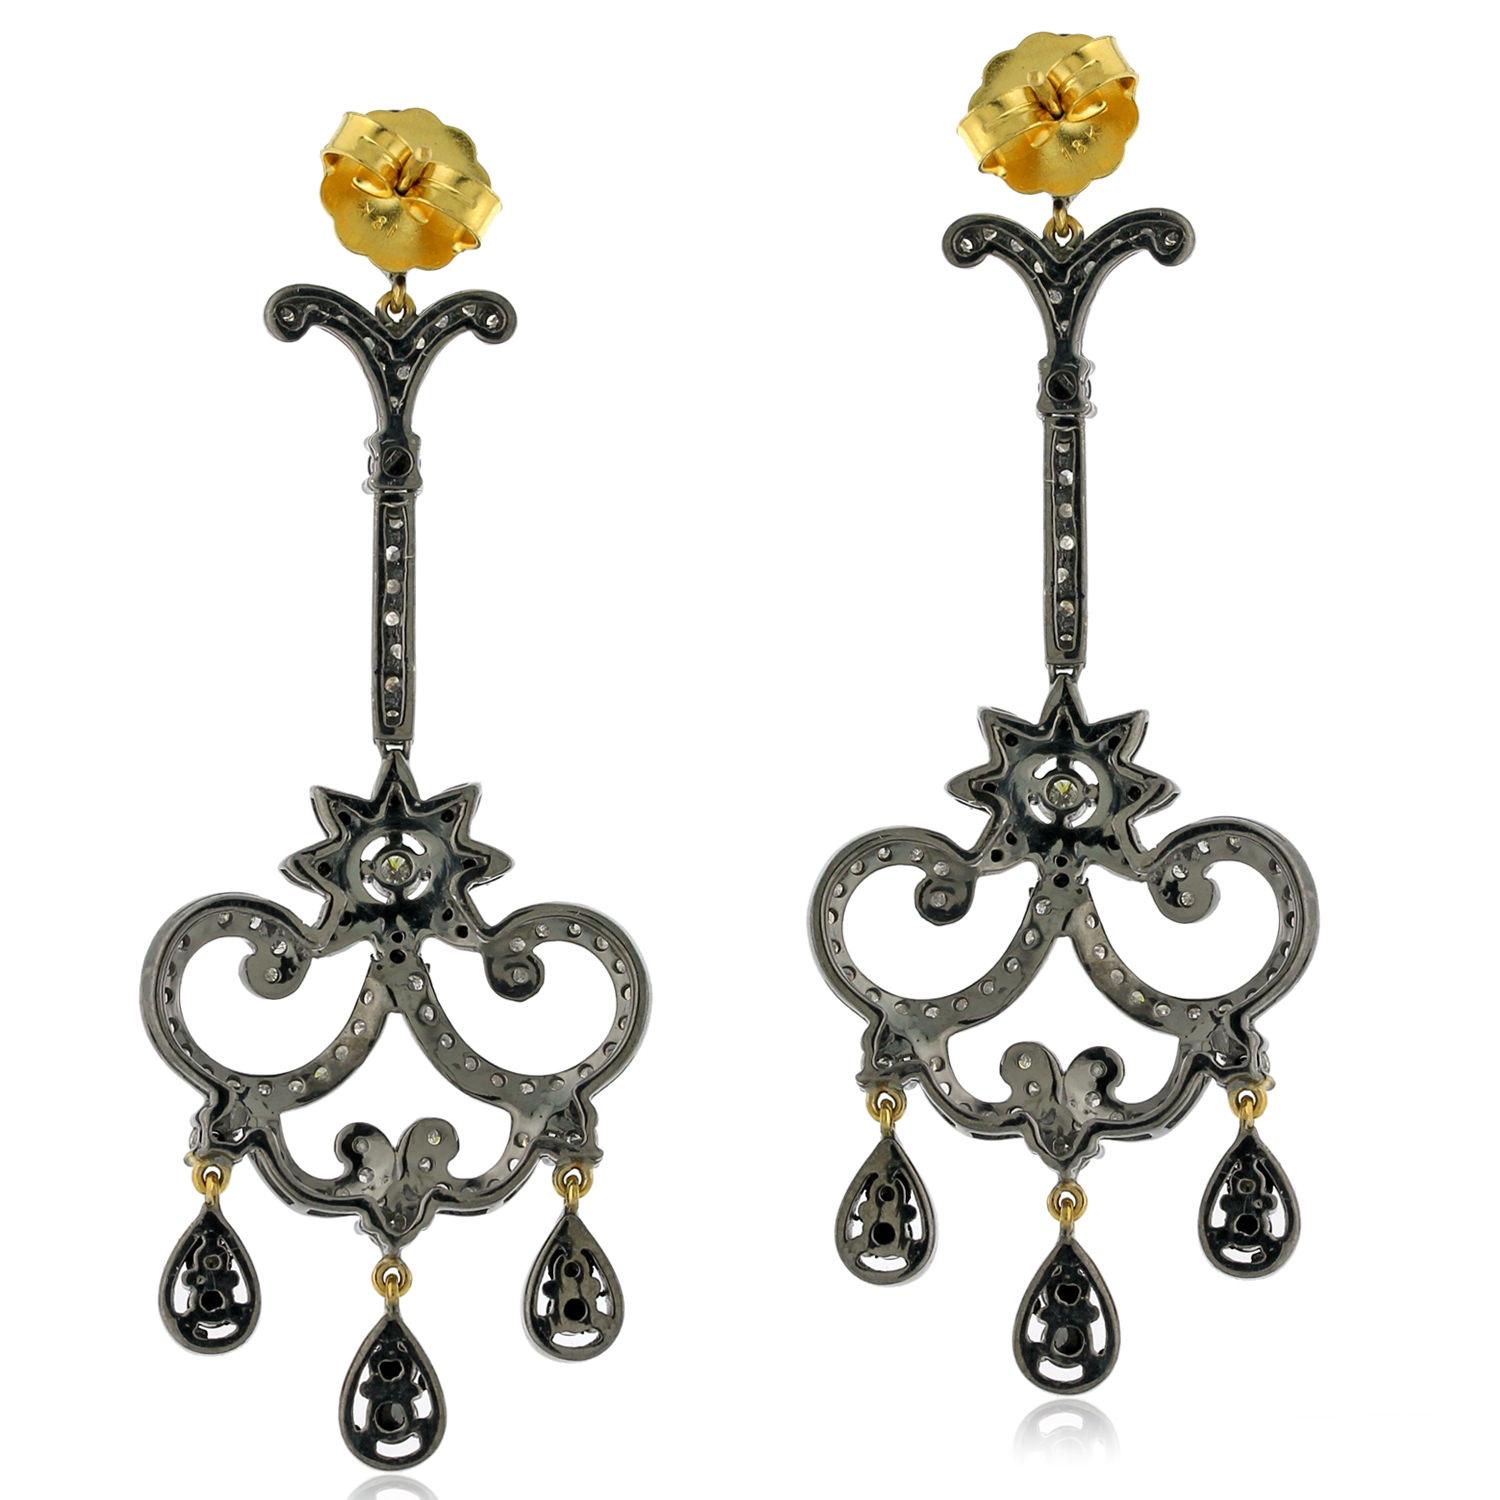 This stunning flower-style earring is made with 18k gold and silver and features a pave set of diamonds. The earring is expertly crafted to showcase the beauty of the diamonds and the intricate design of the flower. The combination of 18k gold and